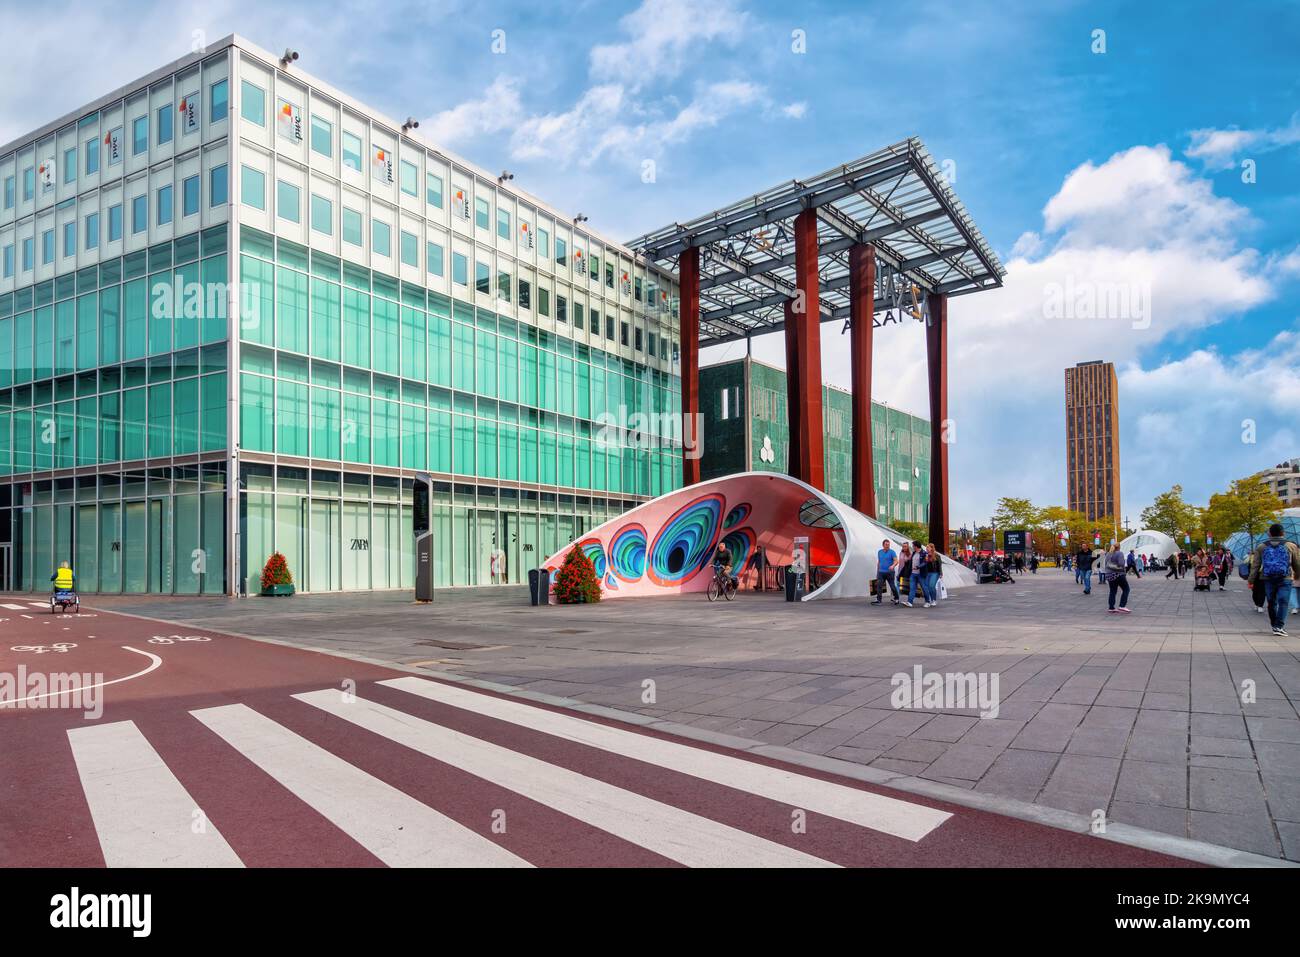 Eindhoven (Piazza), Netherlands, 2022: Shopping square with large canopy at Piazza shopping mall entrance, designed by architect Massimiliano Fuksas. Stock Photo